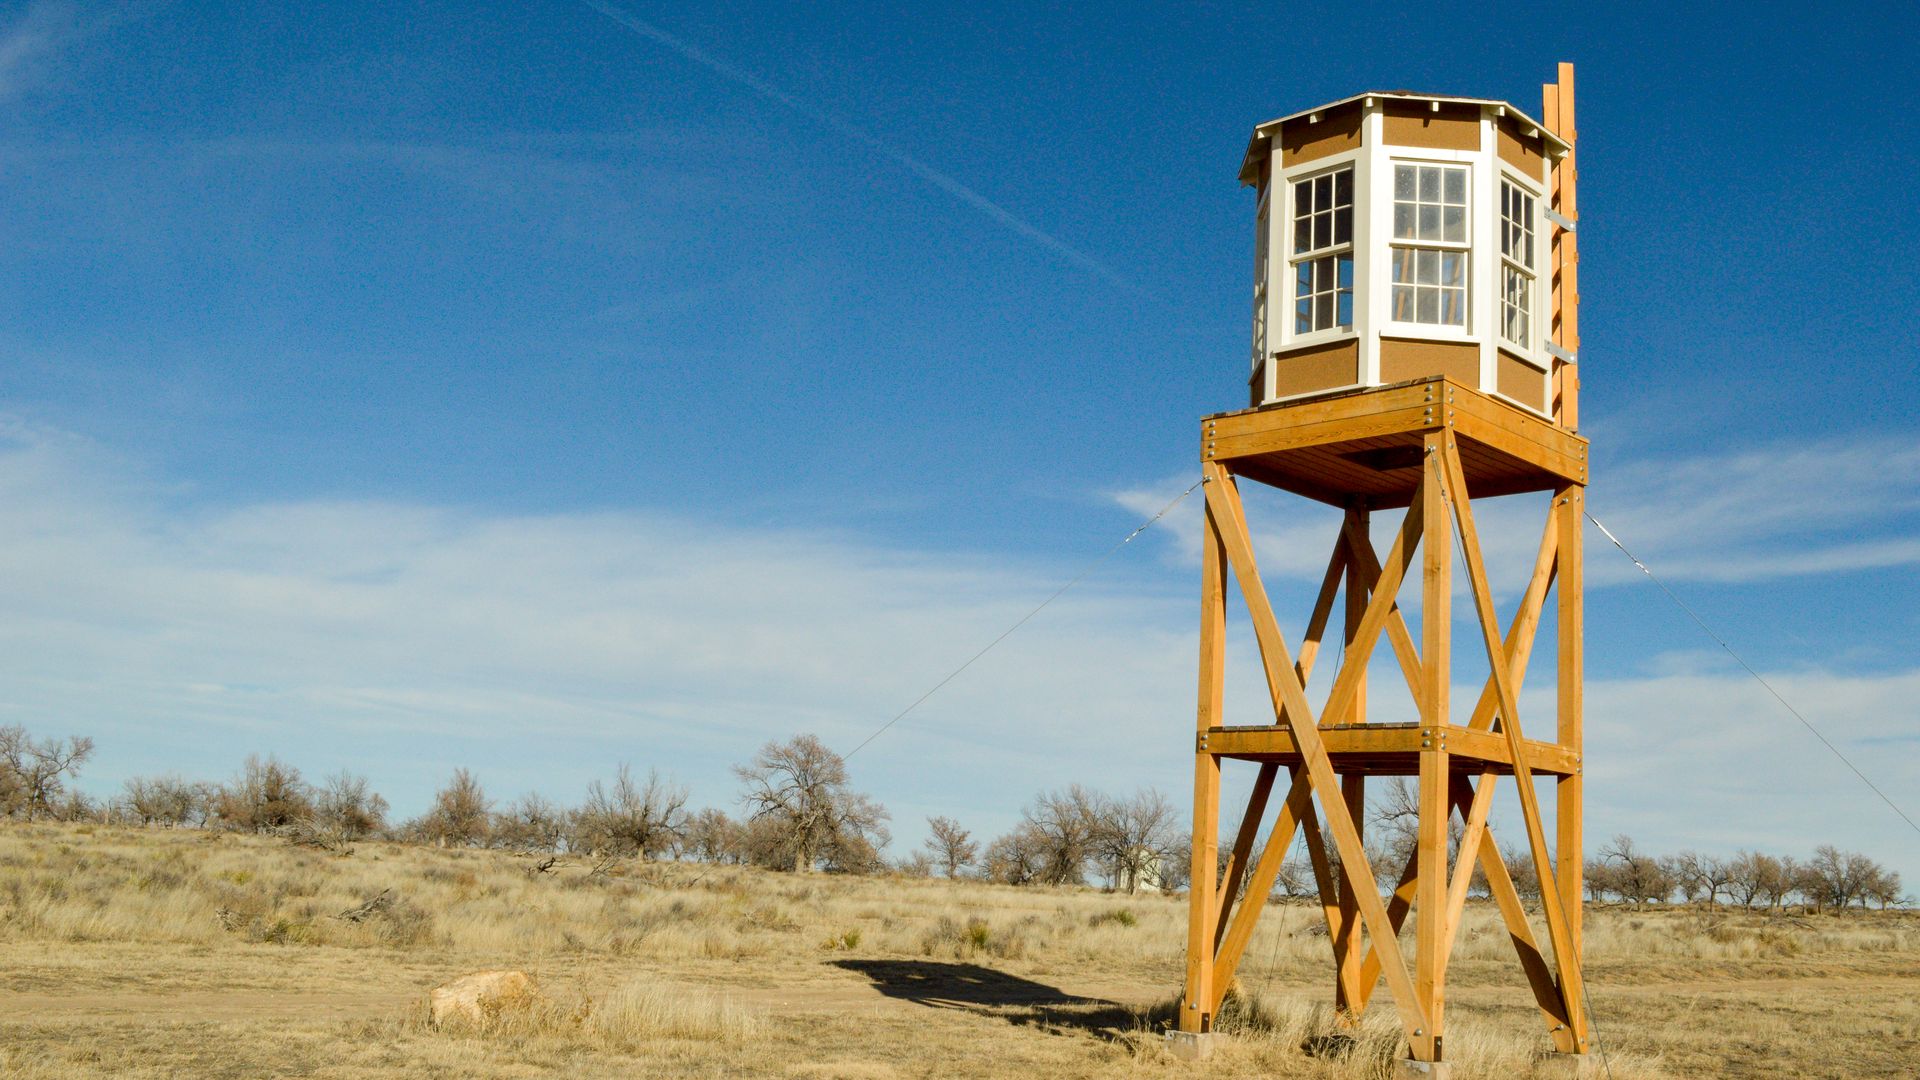 Photo of a mounted guardhouse overlooking dry land against a blue sky